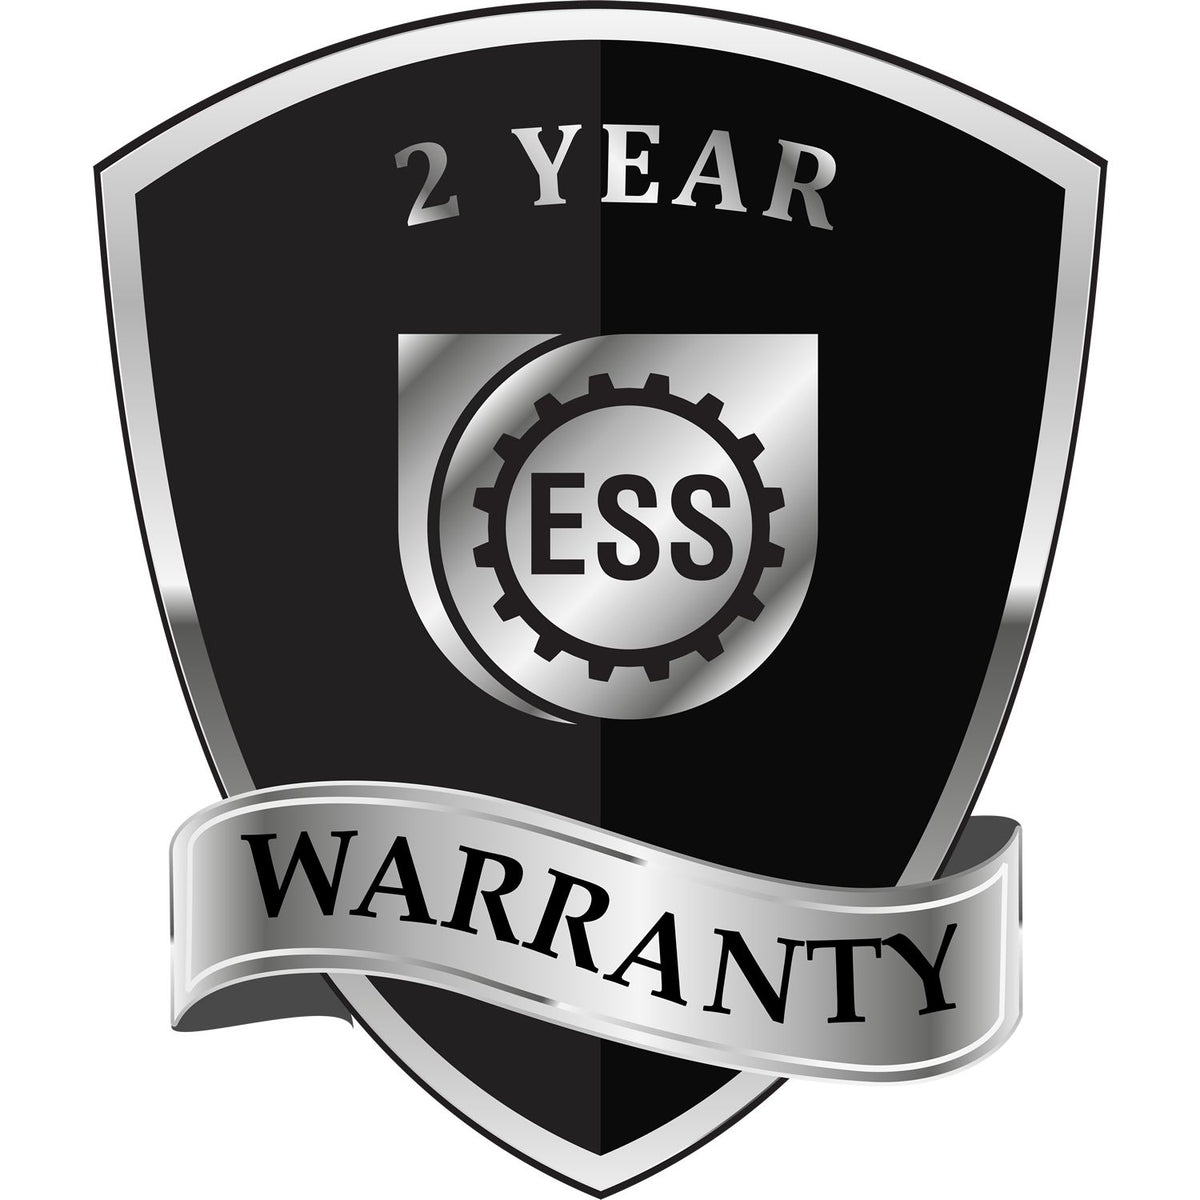 A black and silver badge or emblem showing warranty information for the Hybrid Pennsylvania Landscape Architect Seal